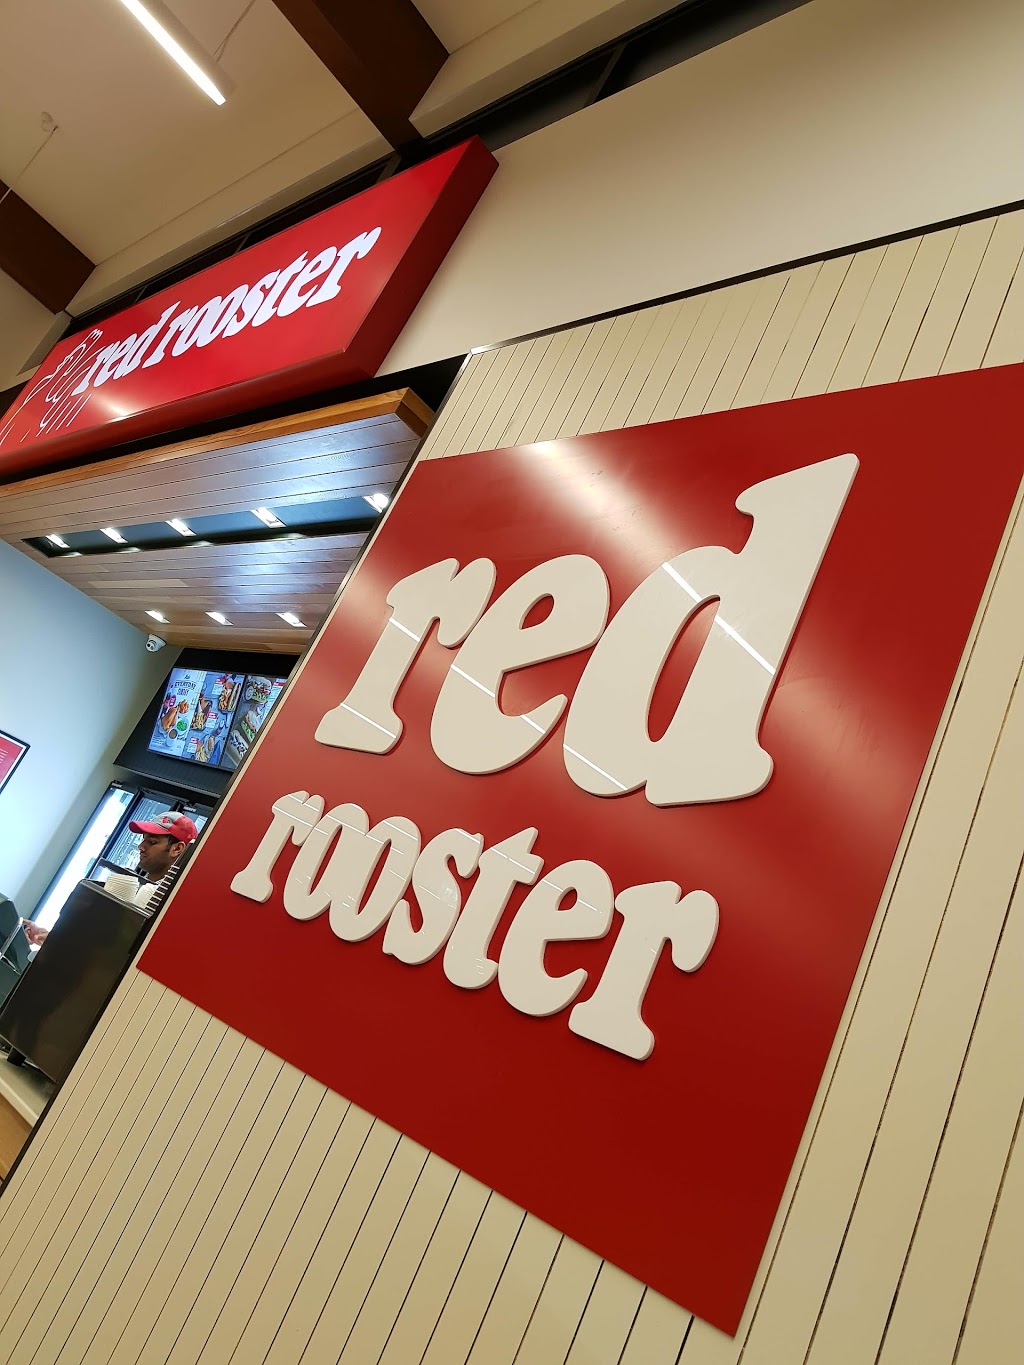 Red Rooster | restaurant | Lot 192 Leary Rd, Baldivis WA 6171, Australia | 0895236628 OR +61 8 9523 6628